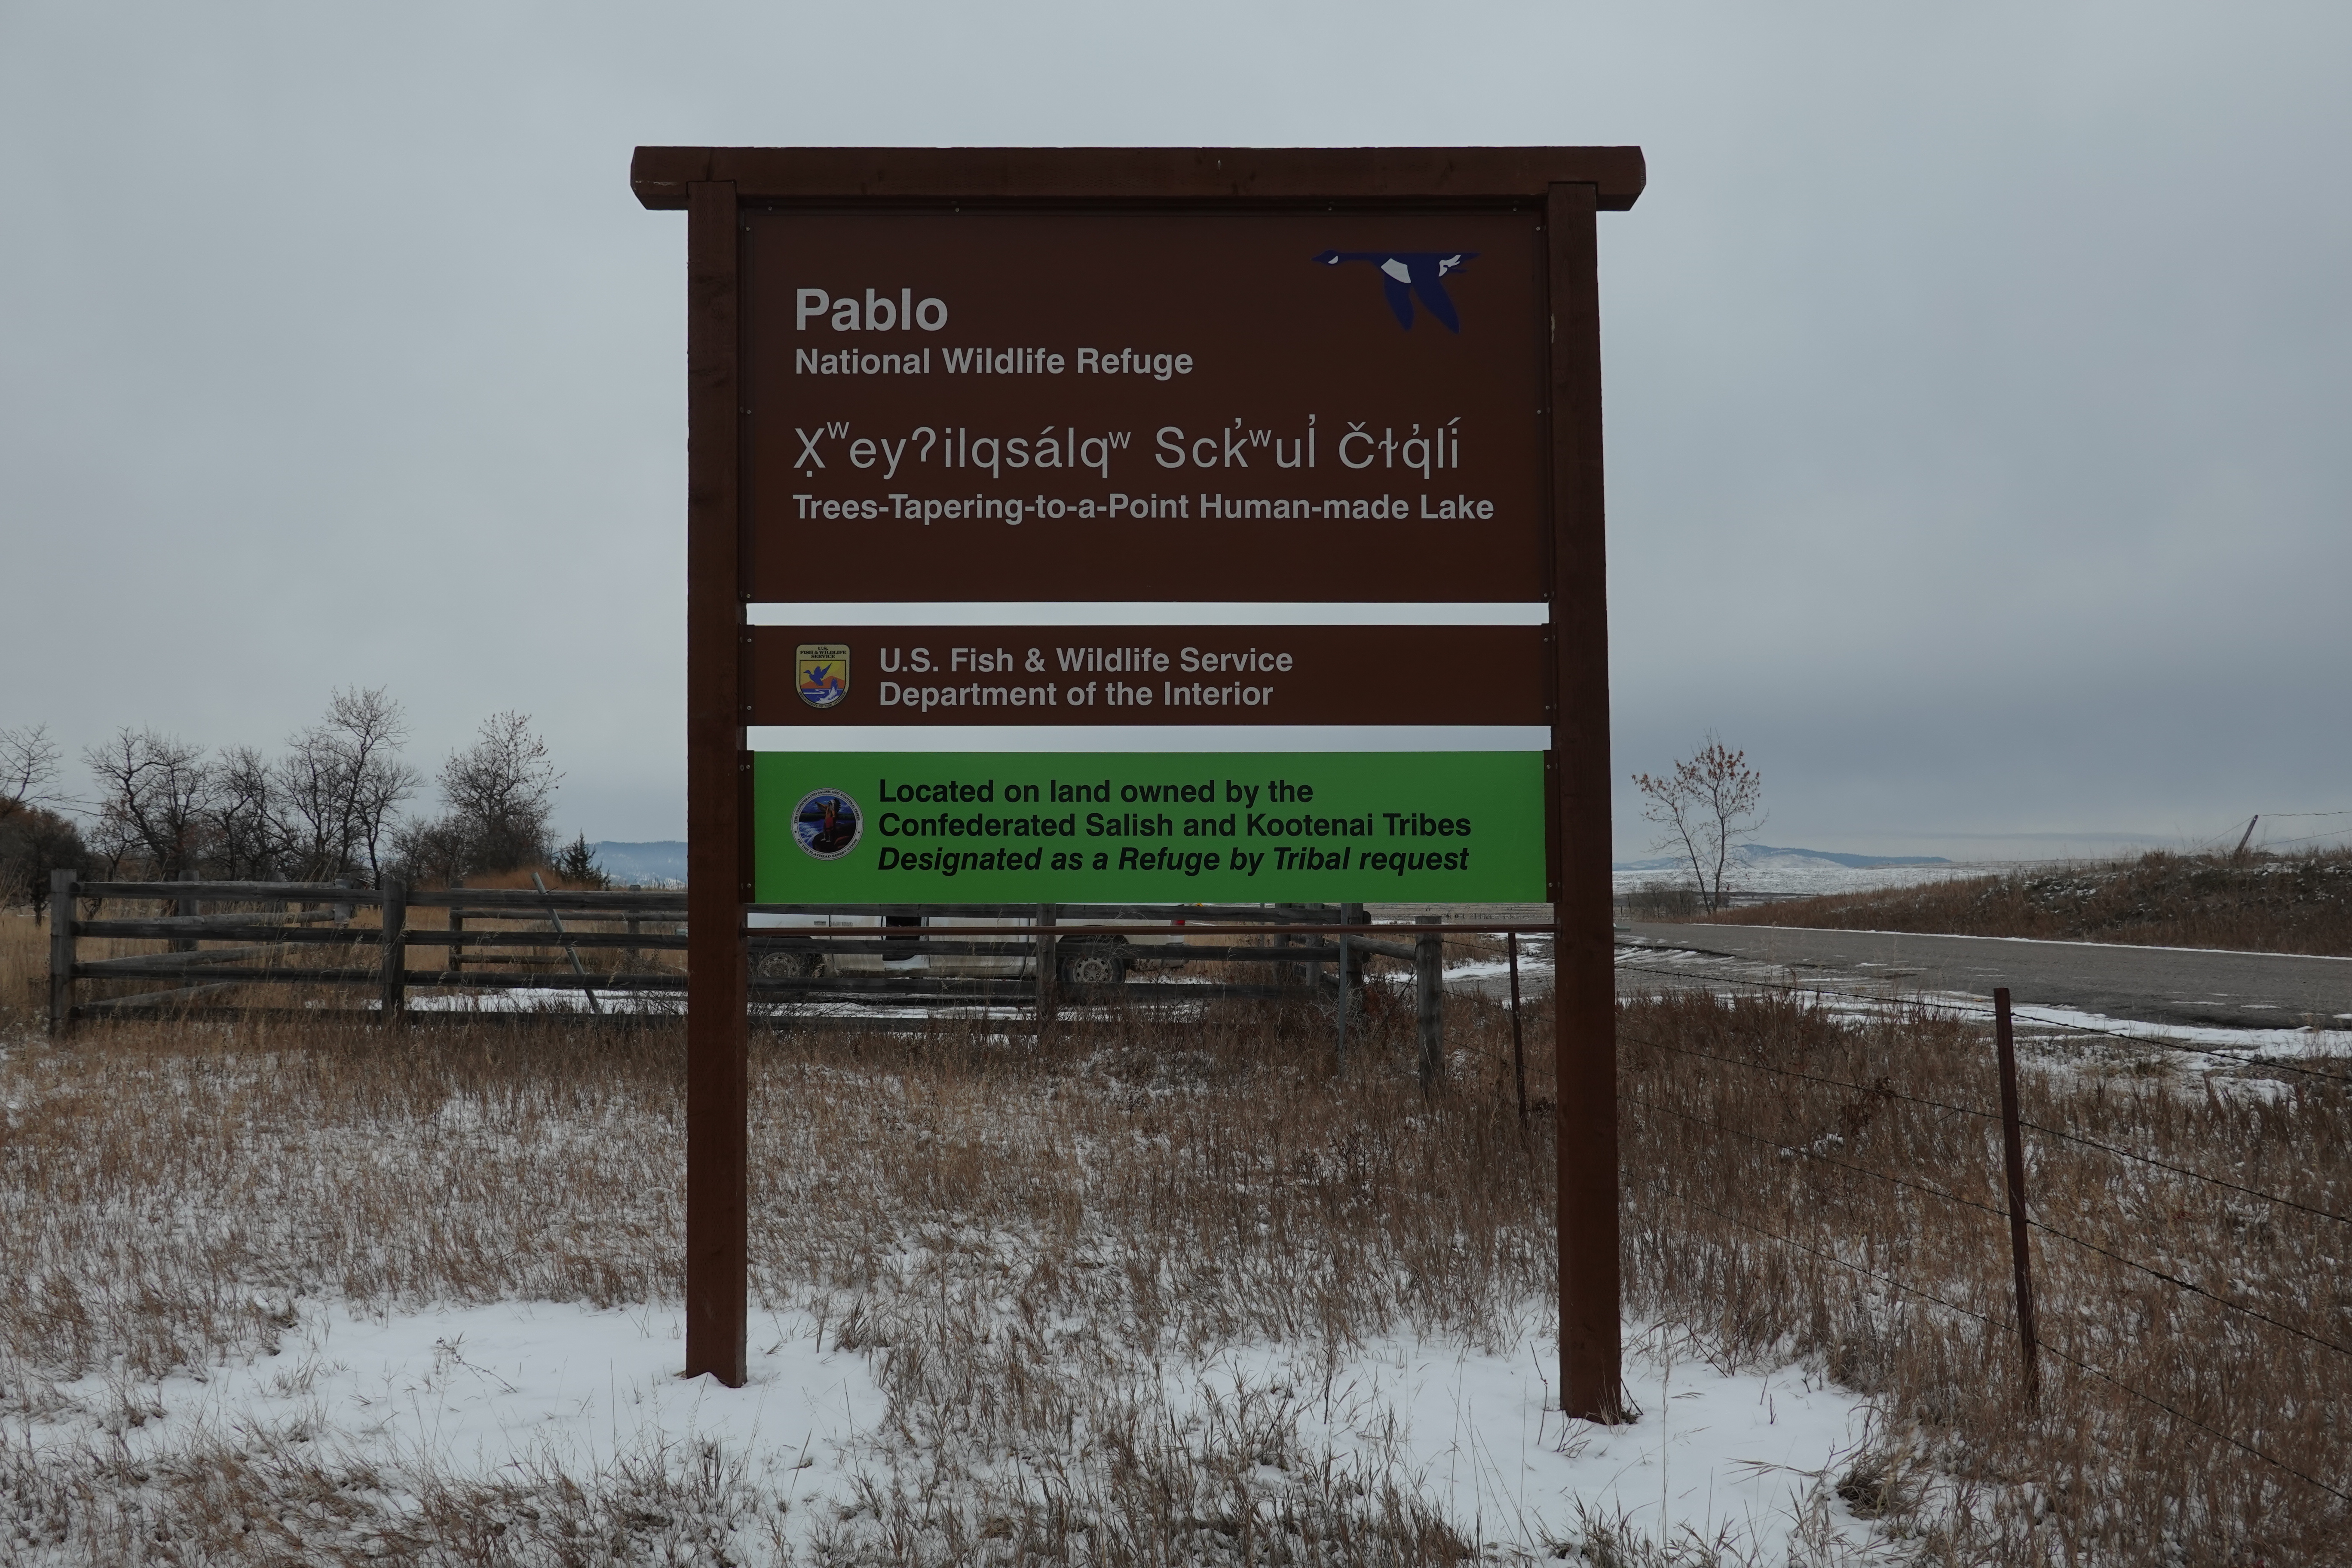 One of the new entrance signs at Pablo National Wildlife Refuge in Salish that states Trees-Tapering-to-a-point Human-made Lake